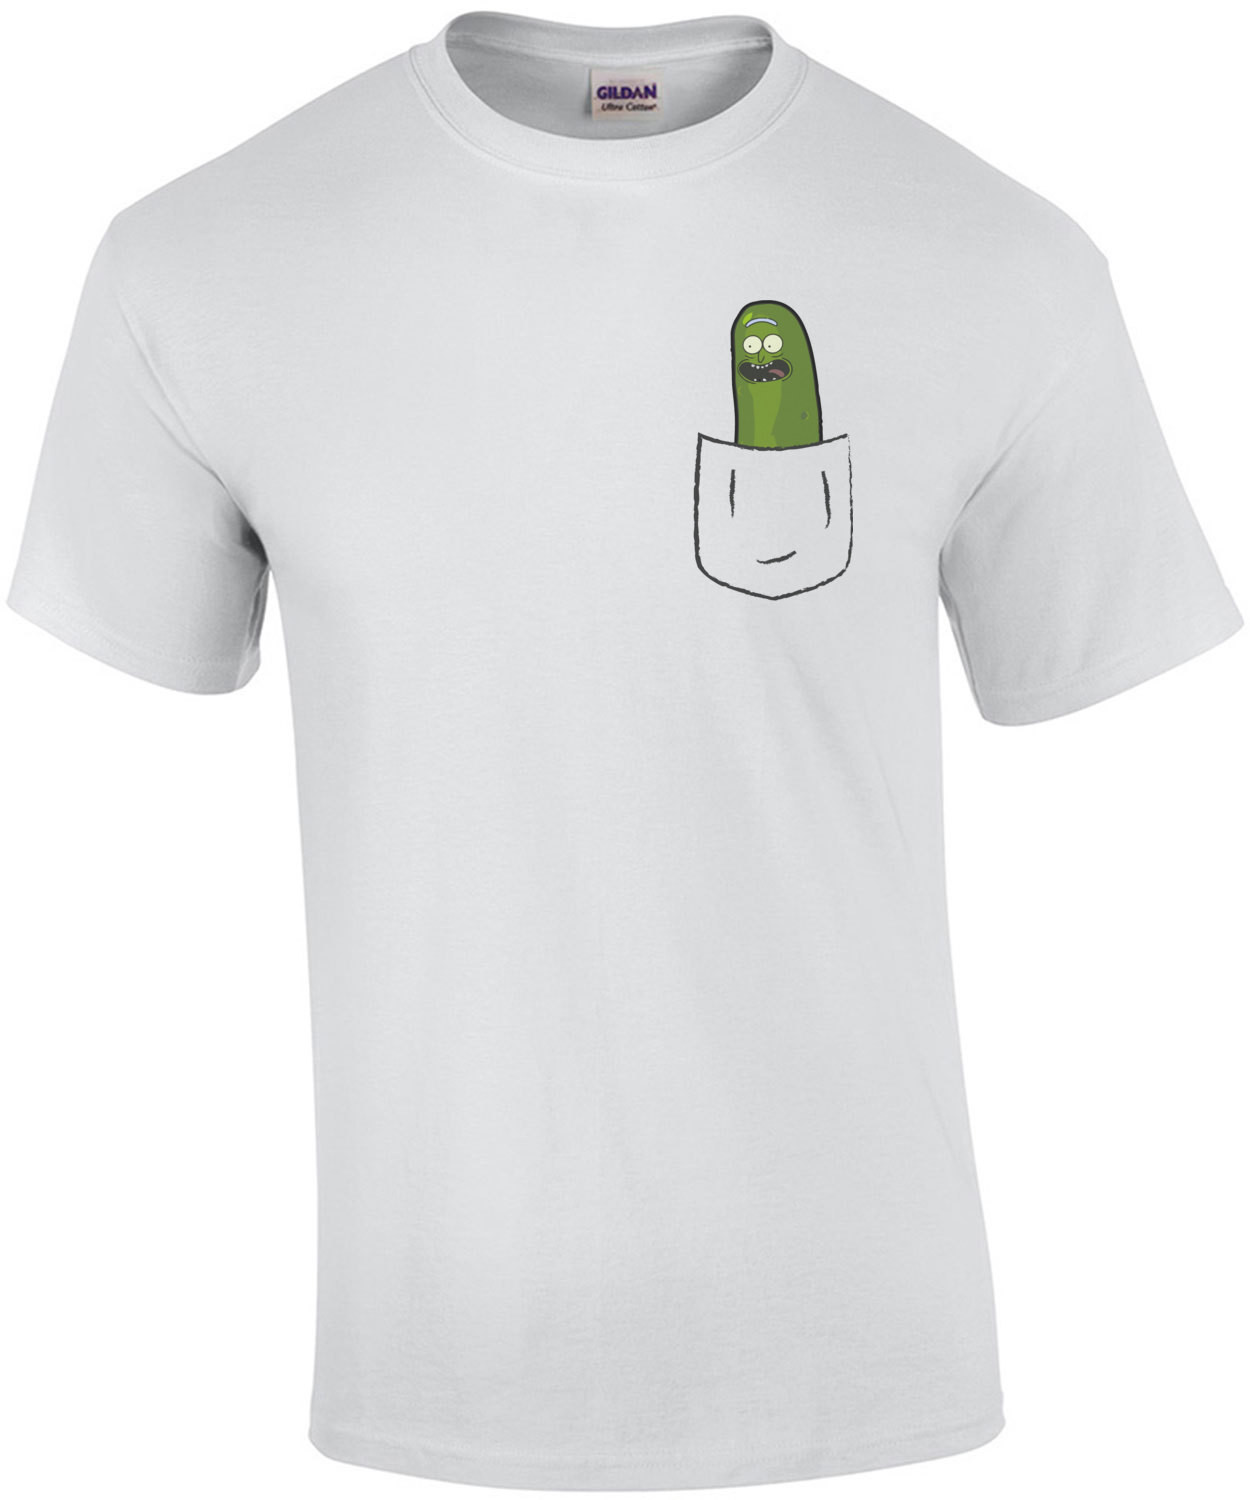 Rick And Morty - Pickle Rick in pocket t-shirt